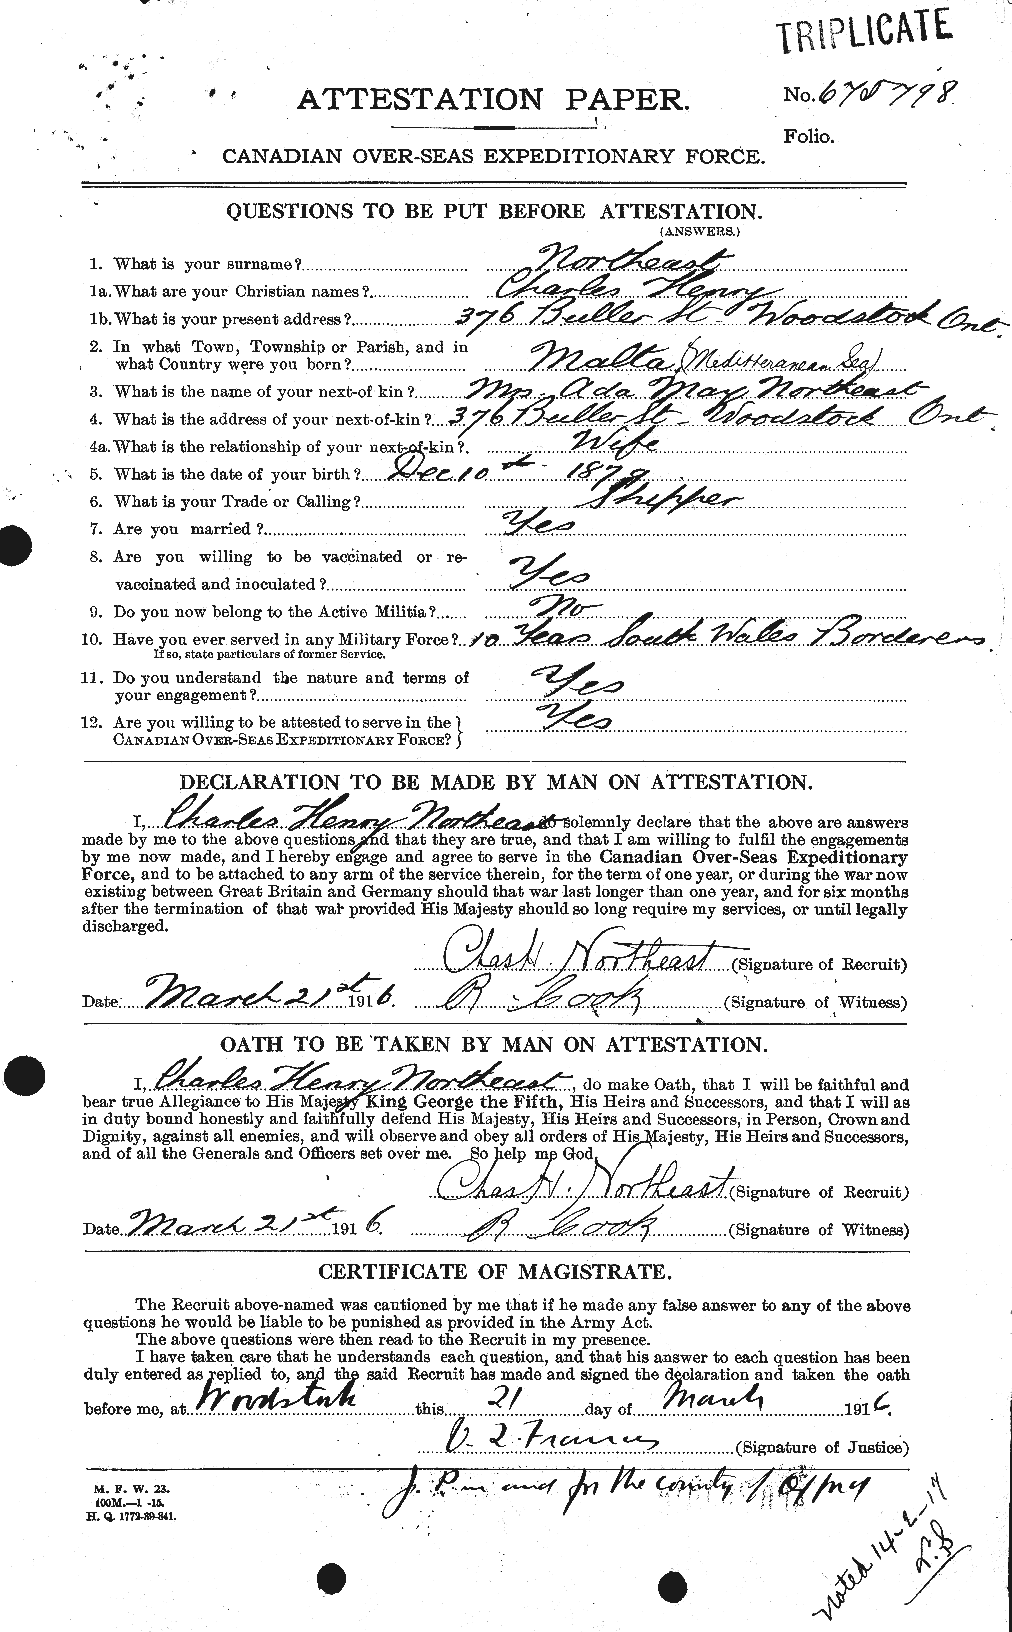 Personnel Records of the First World War - CEF 551661a